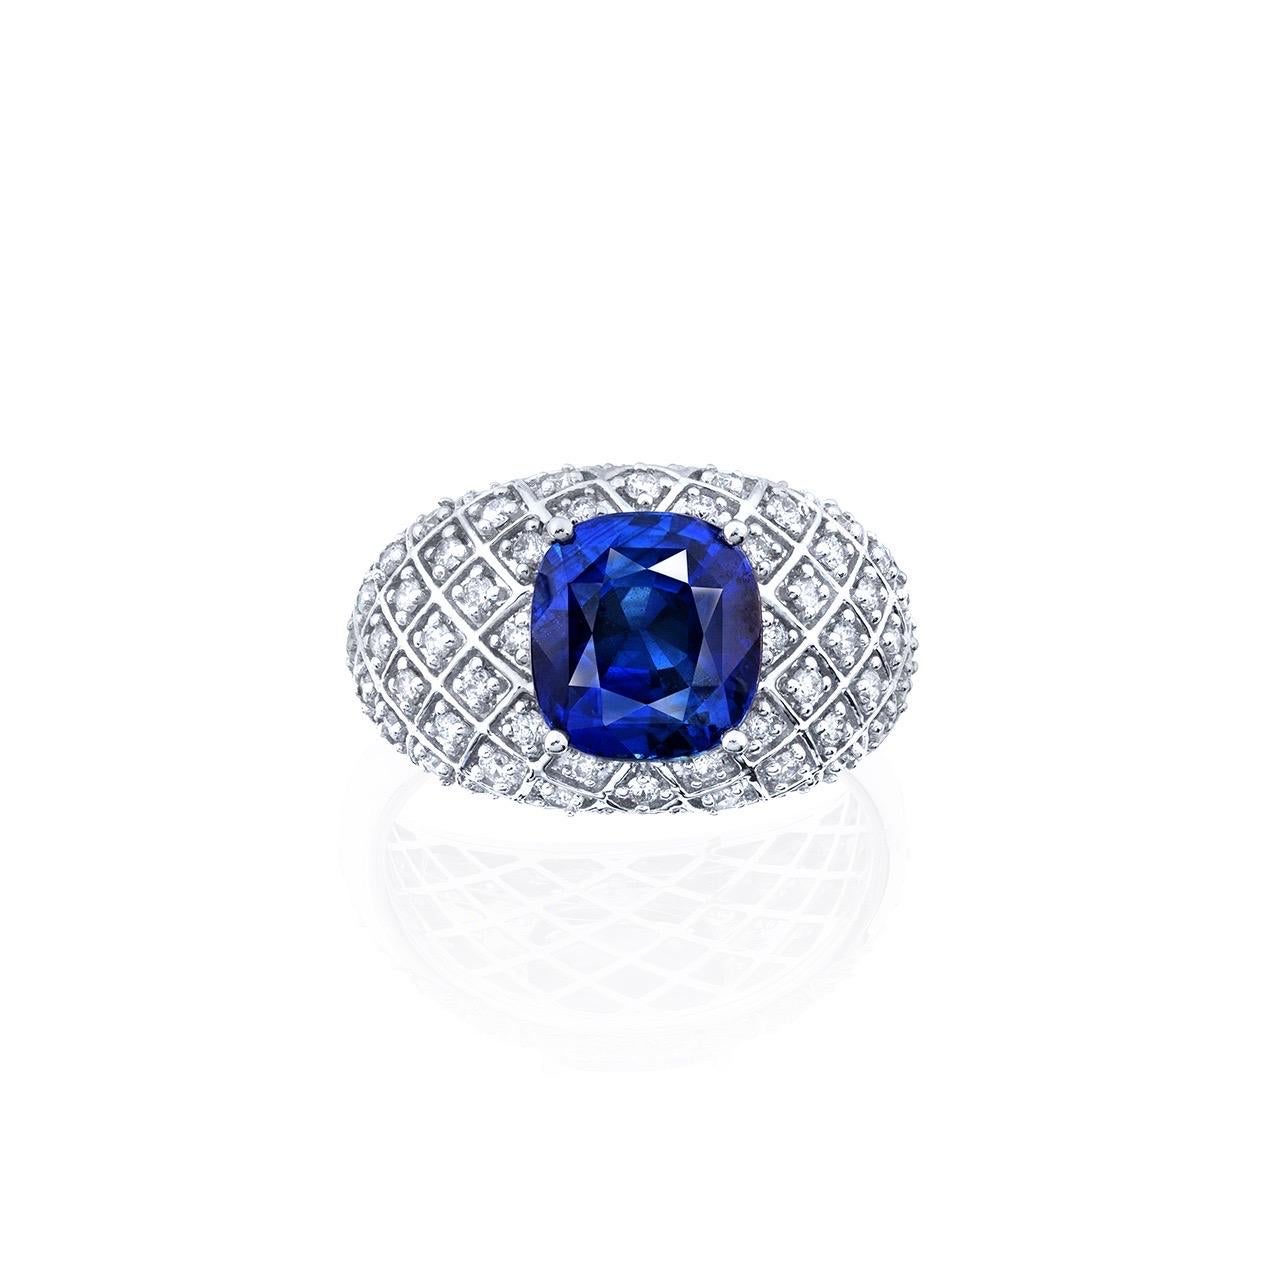 From Emilio Jewelry, a well known and respected wholesaler/dealer located on New York’s iconic Fifth Avenue, 

Featuring a true cornflower blue untreated Sri Lankan Ceylon Sapphire just over 5 Carats. 
Please inquire for more images, certificates,